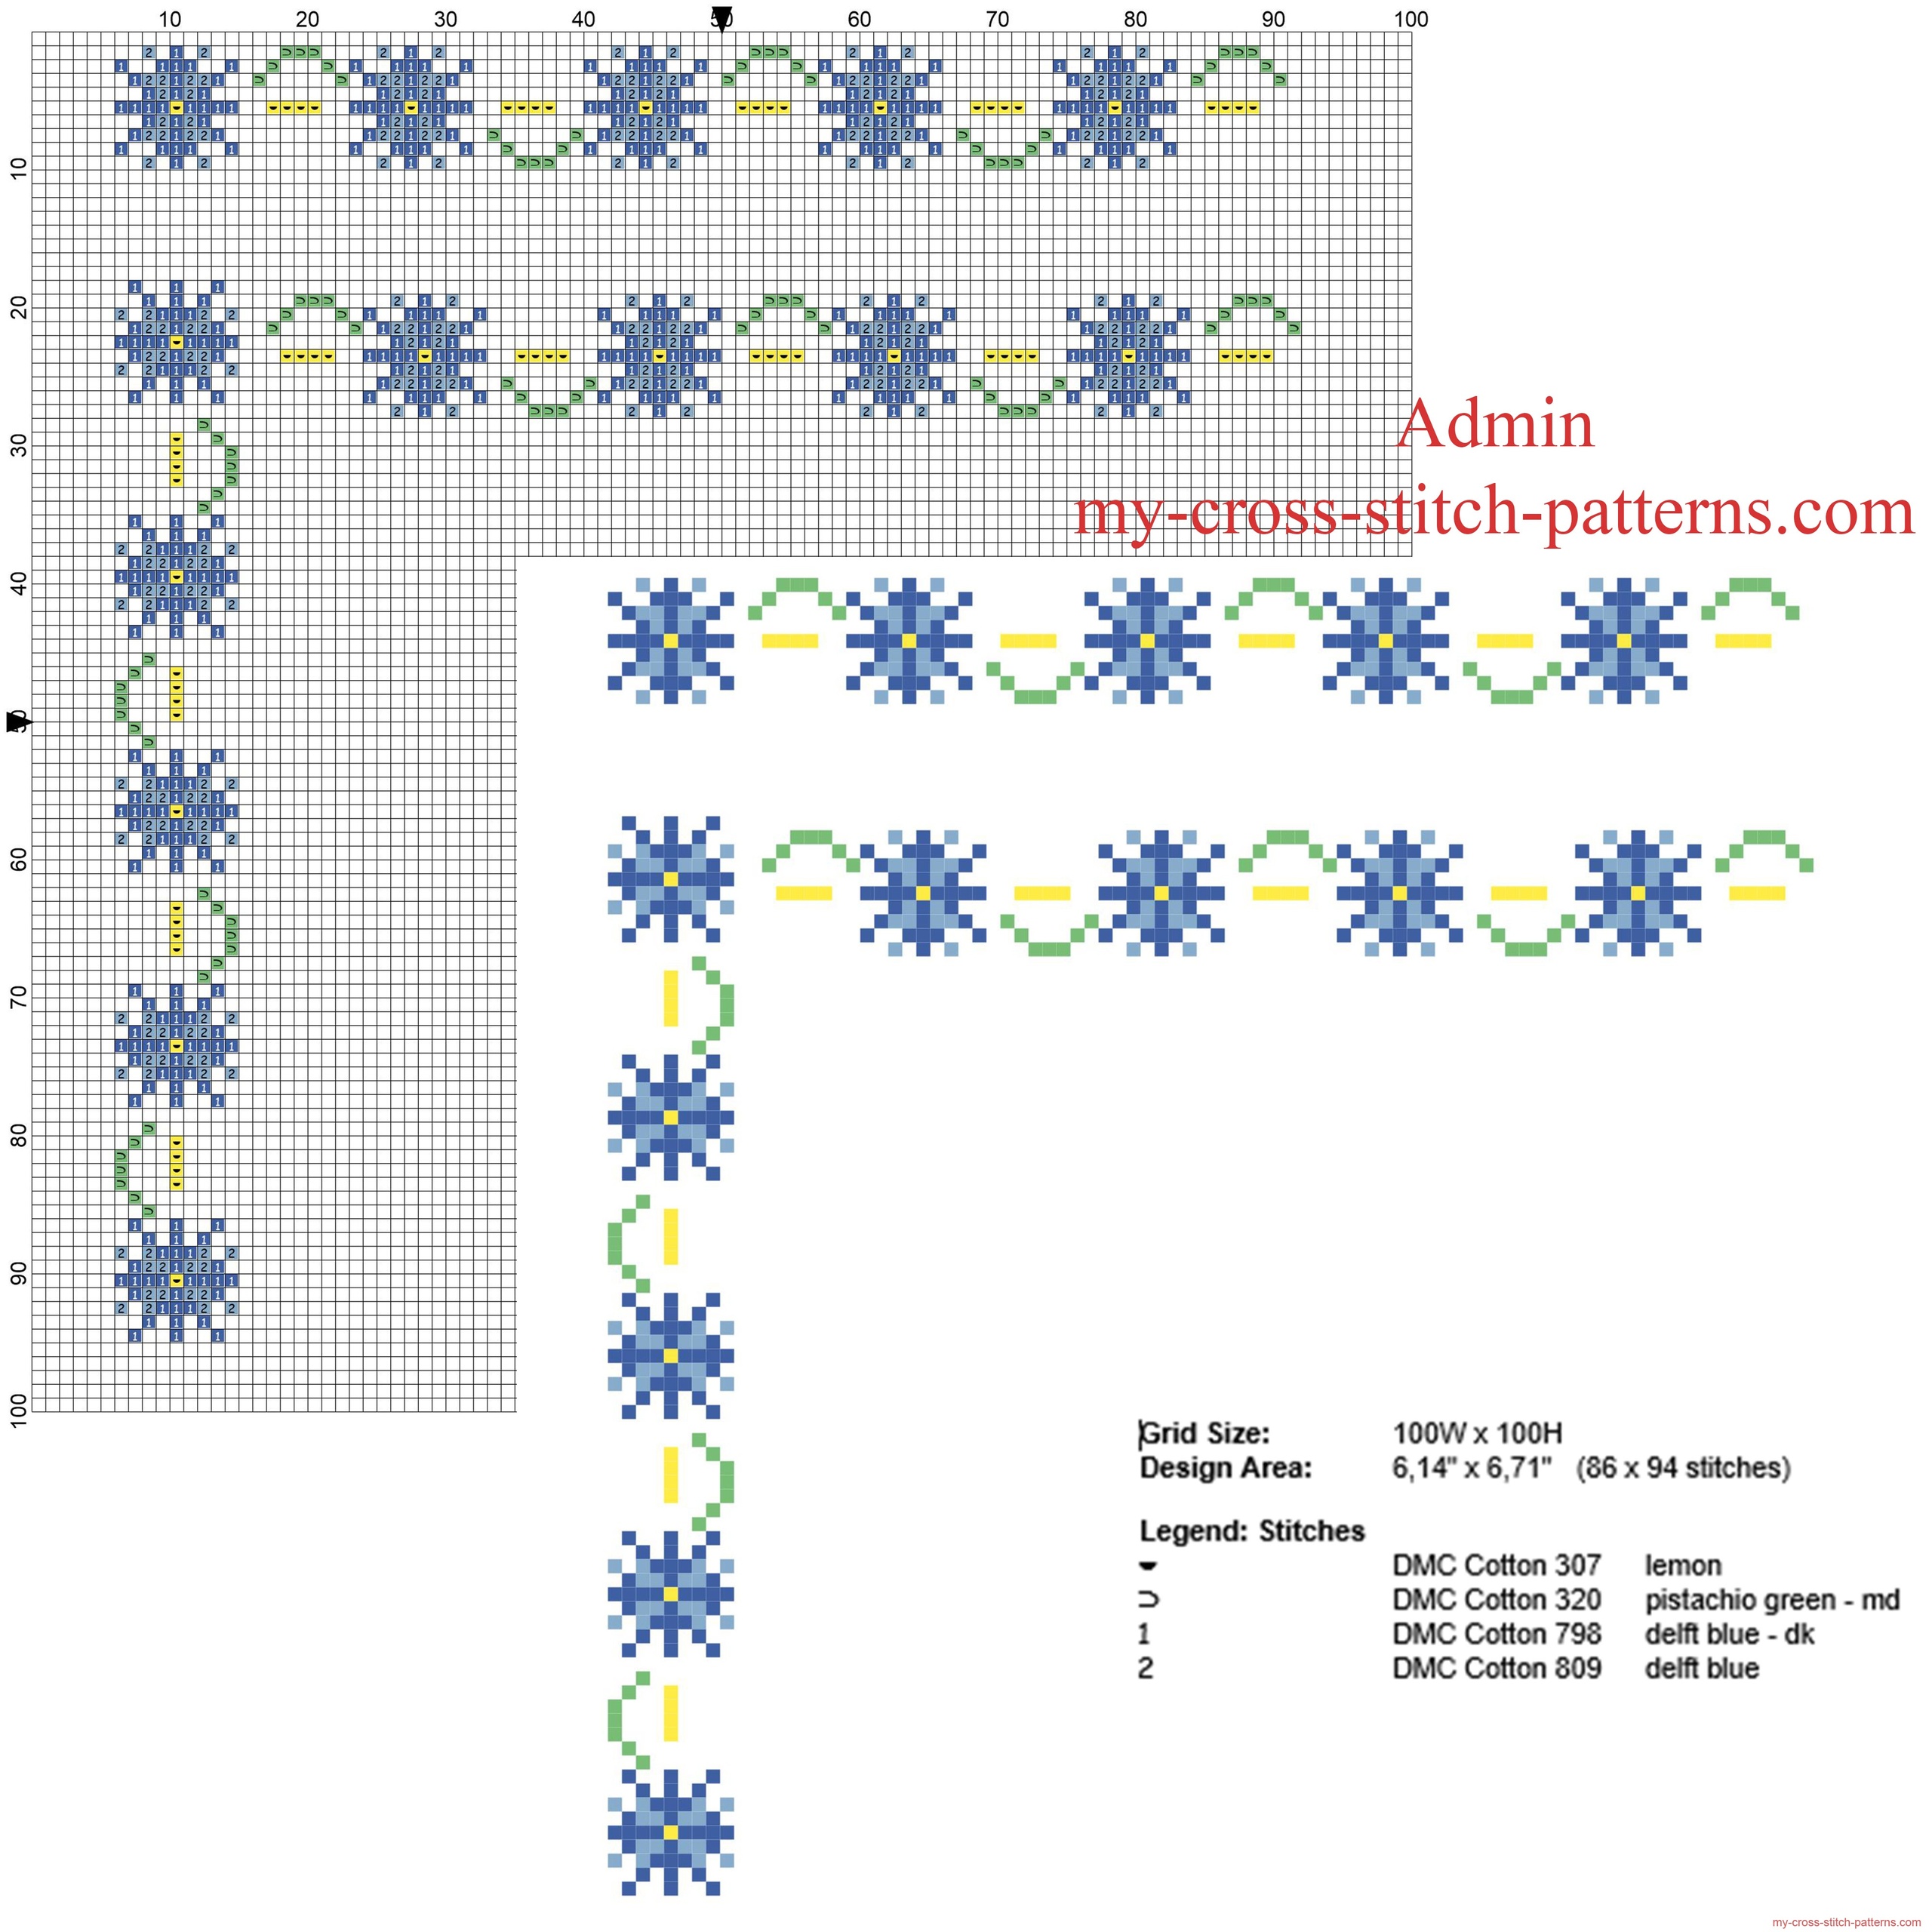 floral_border_with_blue_and_light_blue_small_flowers_free_cross_stitch_pattern_width_9_stitches